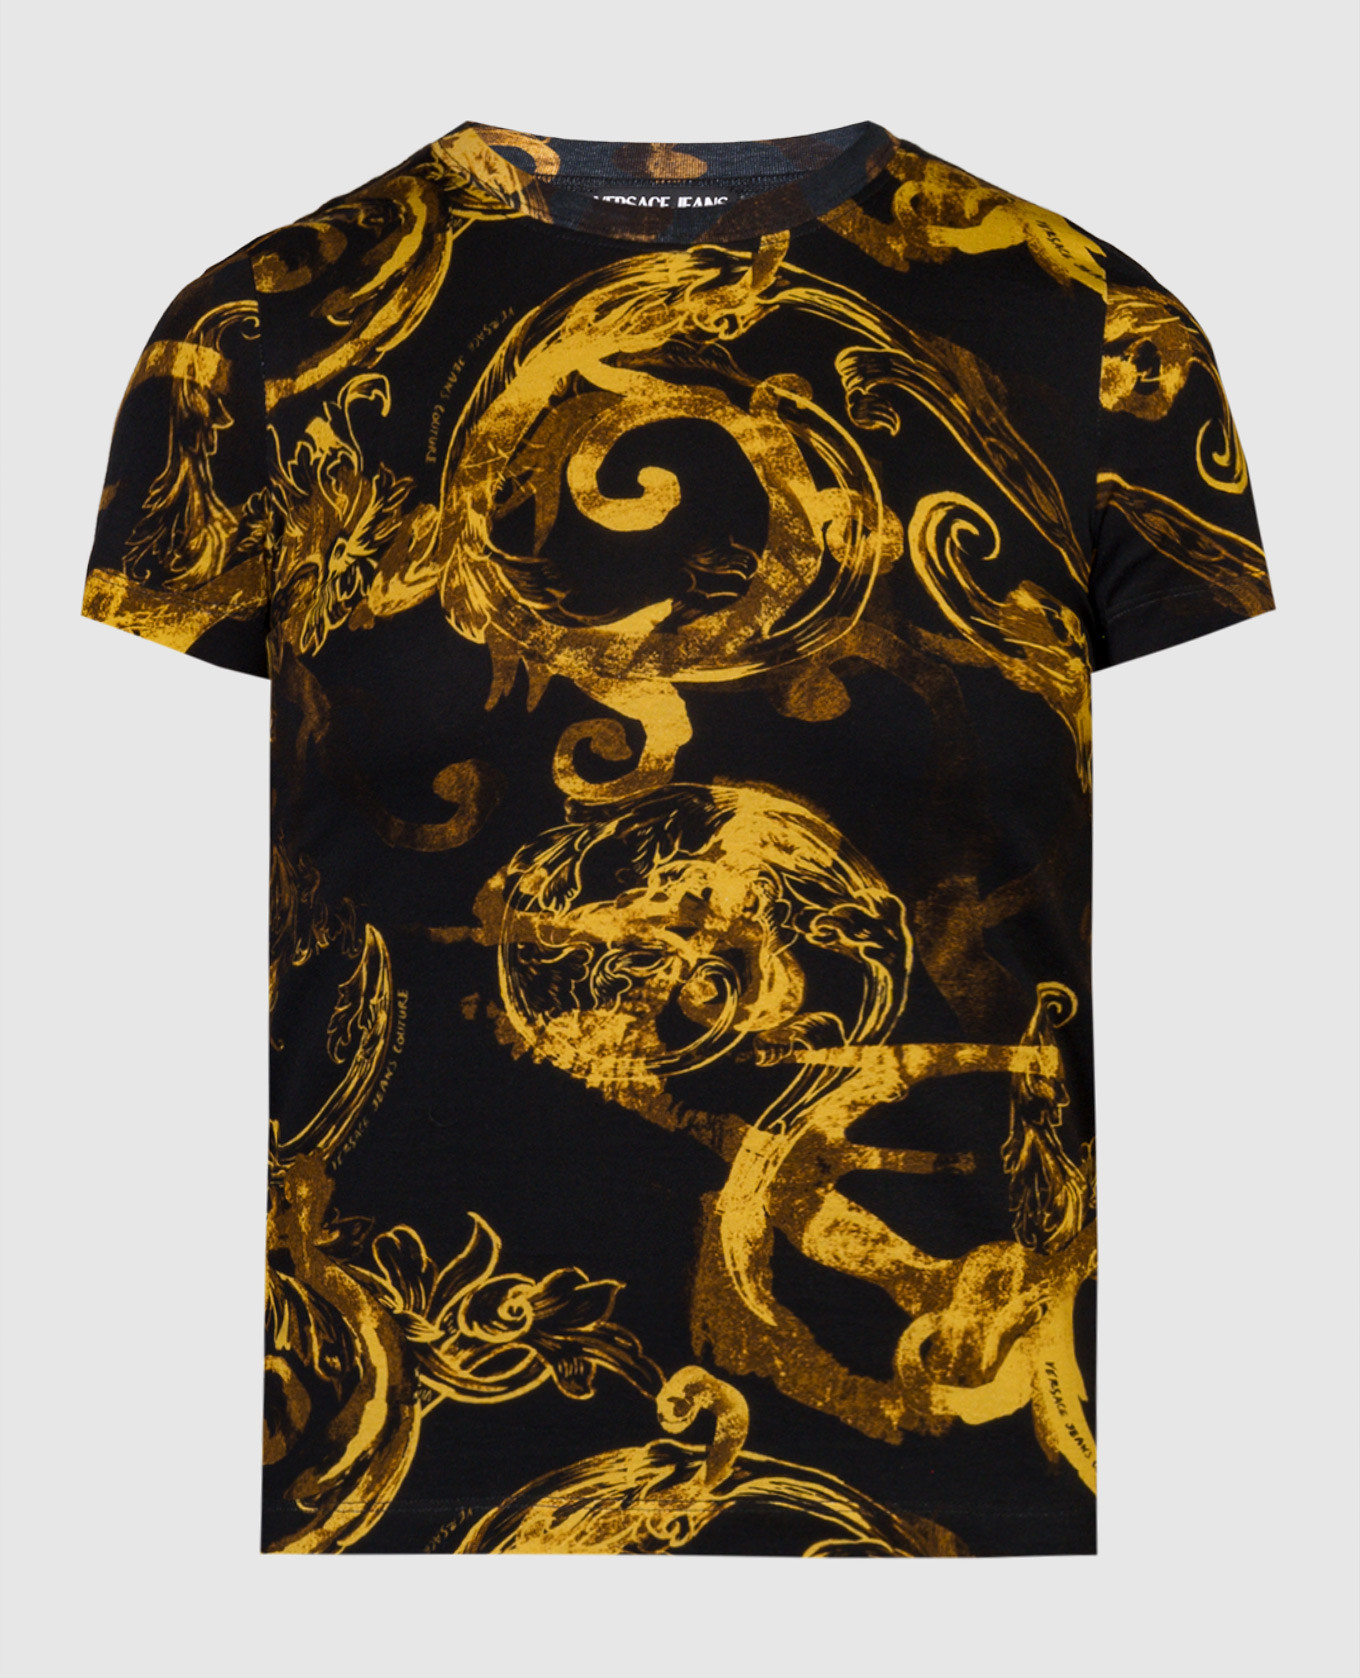 Black t-shirt in Watercolor Couture print